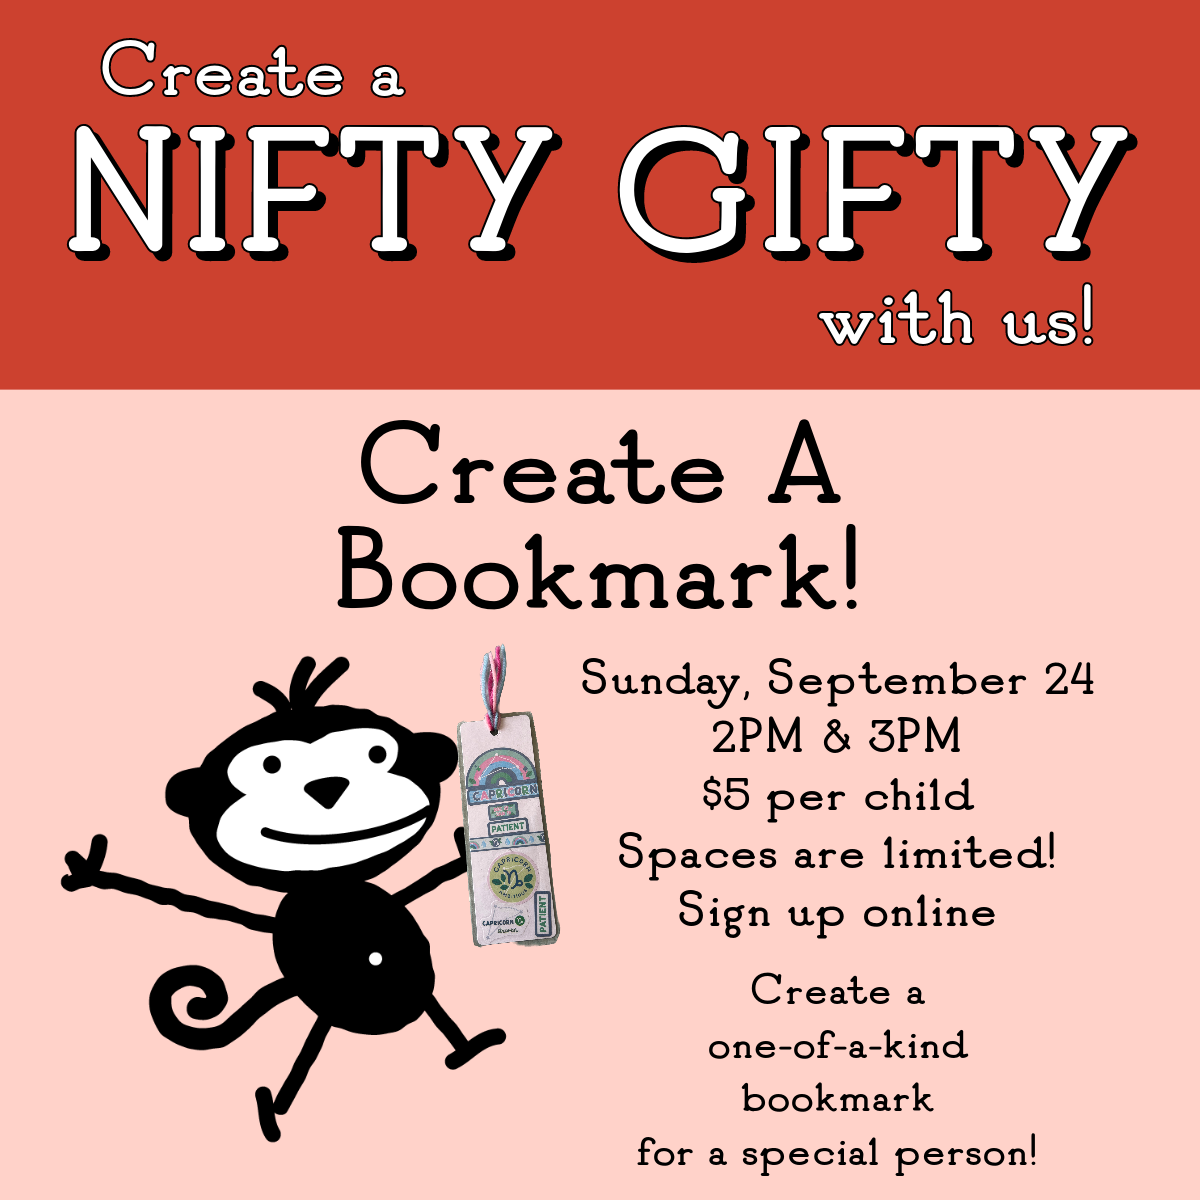 Nifty Gifty Bookmarks